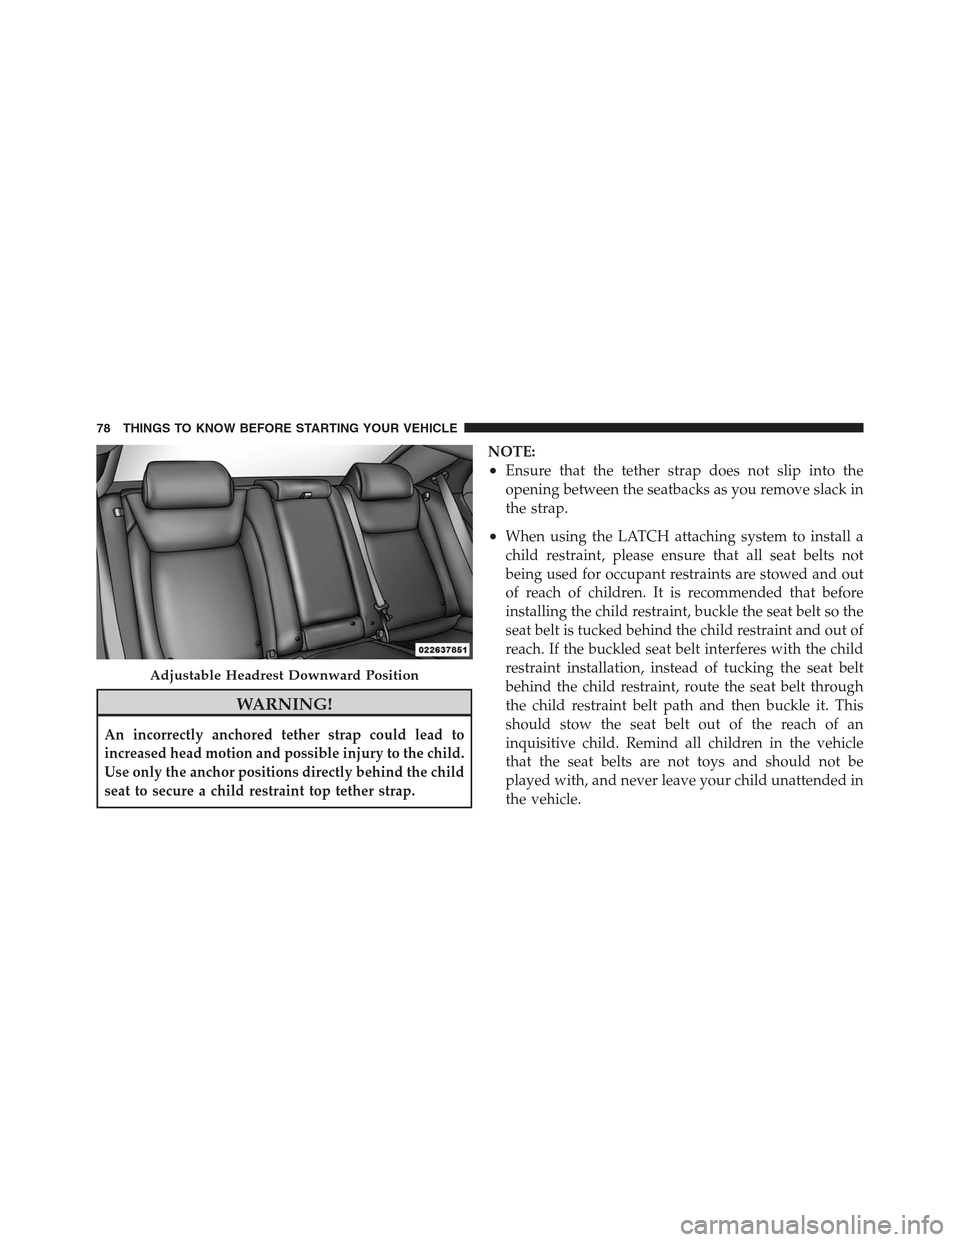 CHRYSLER 300 2012 2.G Manual PDF WARNING!
An incorrectly anchored tether strap could lead to
increased head motion and possible injury to the child.
Use only the anchor positions directly behind the child
seat to secure a child restr